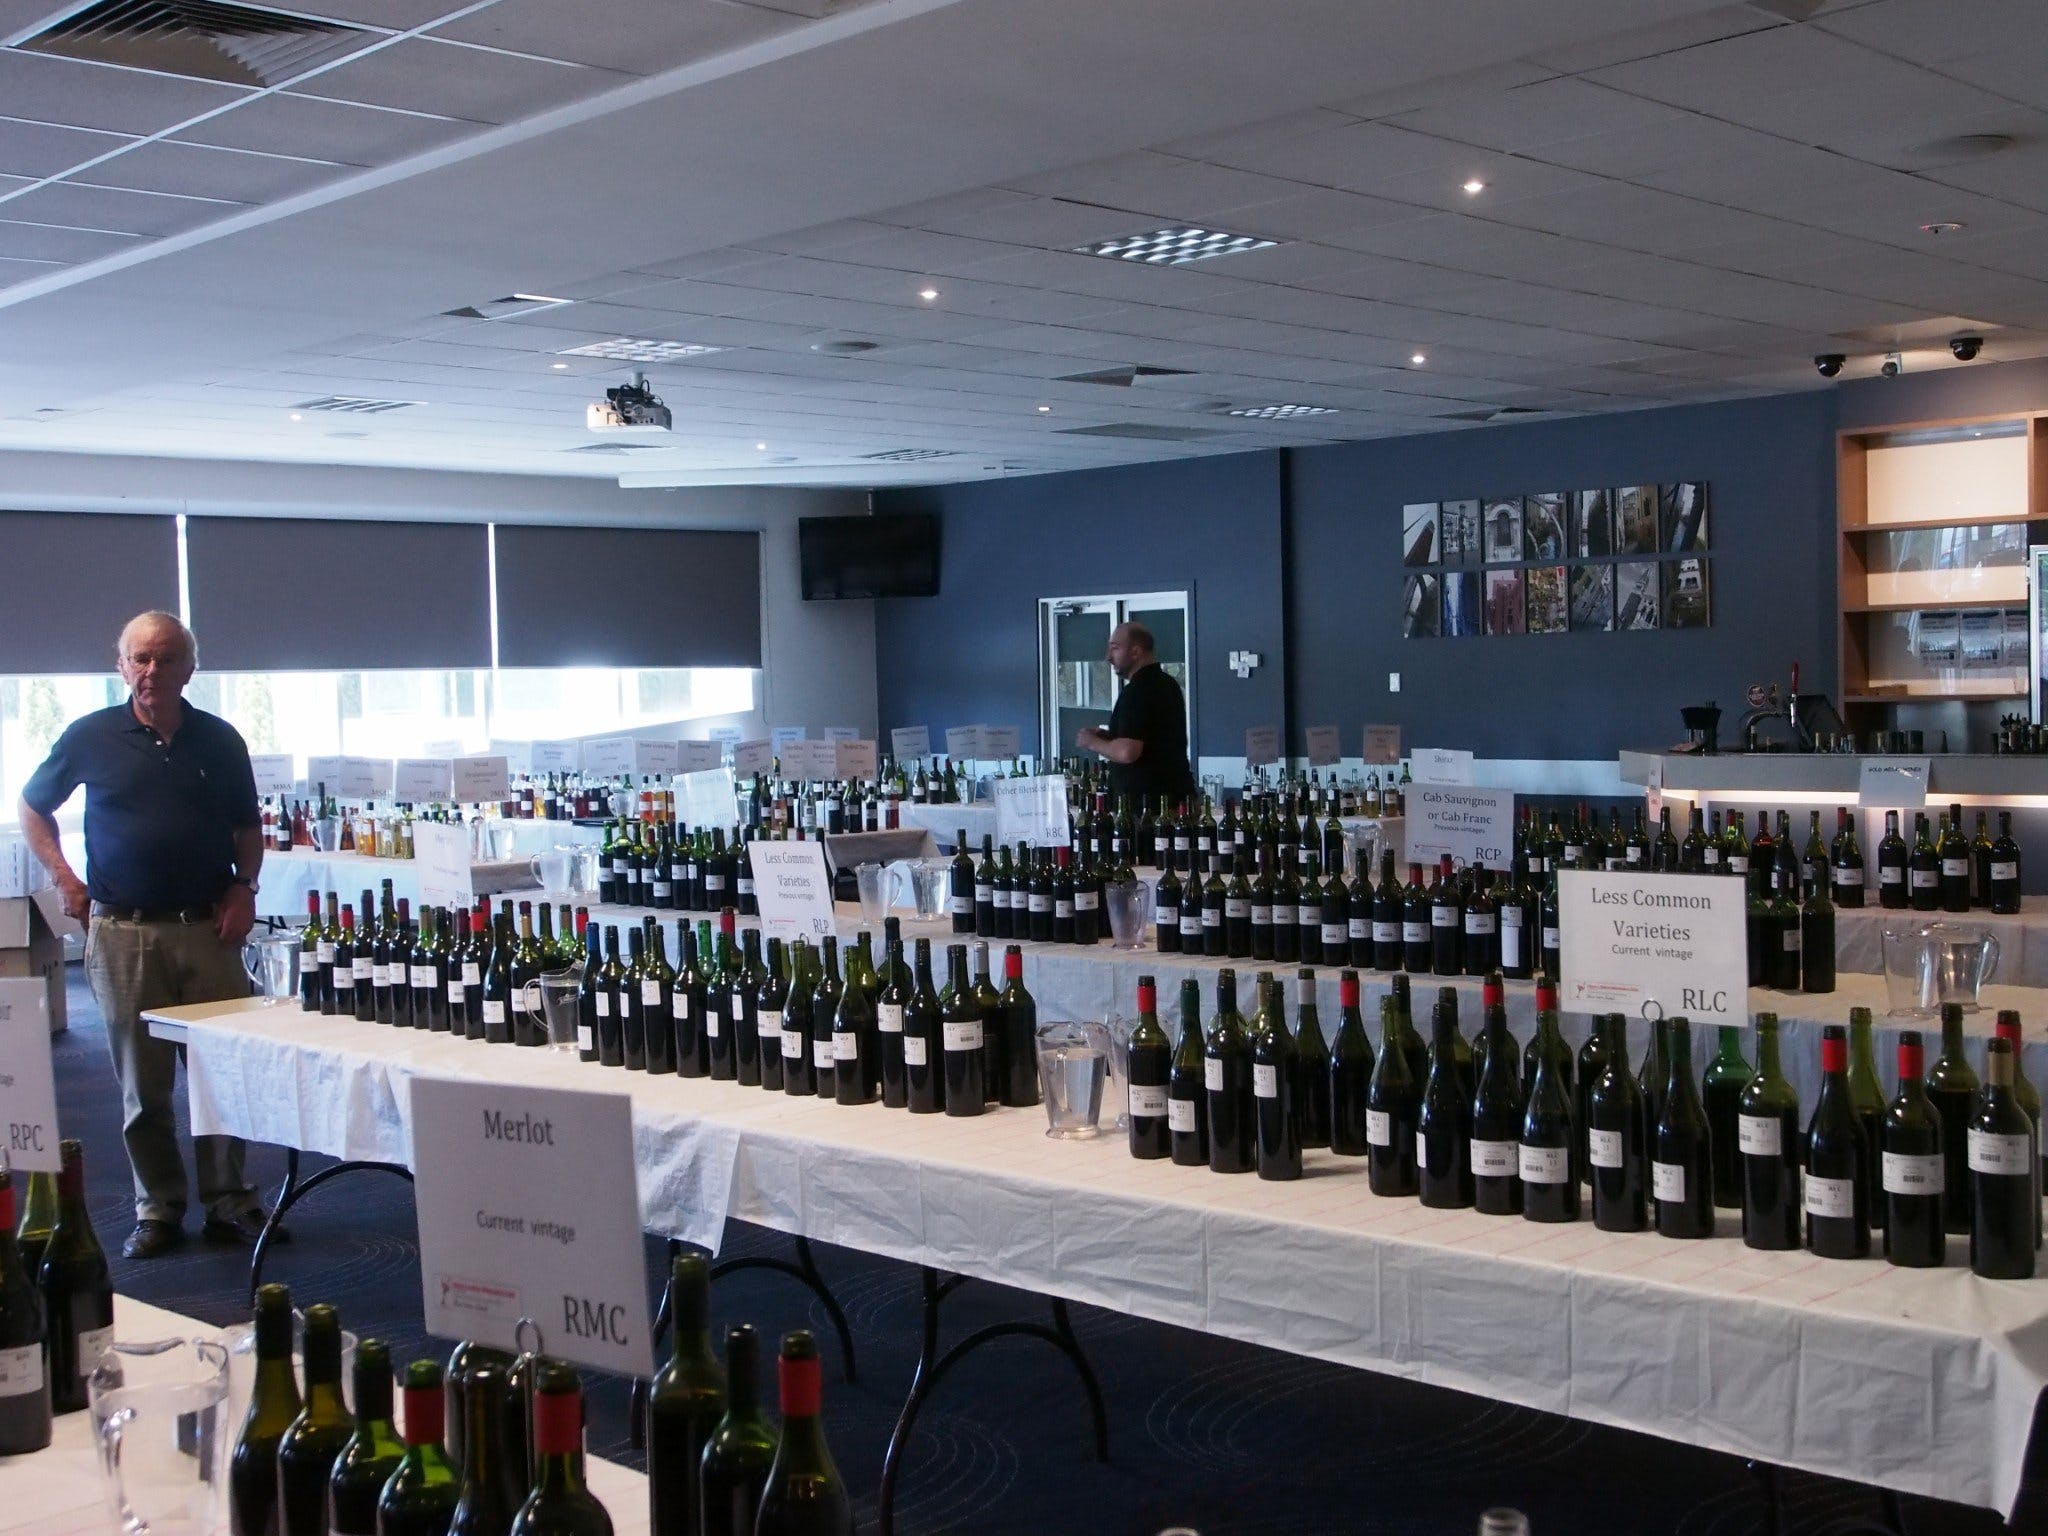 Eltham and District Wine Guild Annual Wine Show - 51st Annual Show - Accommodation NT